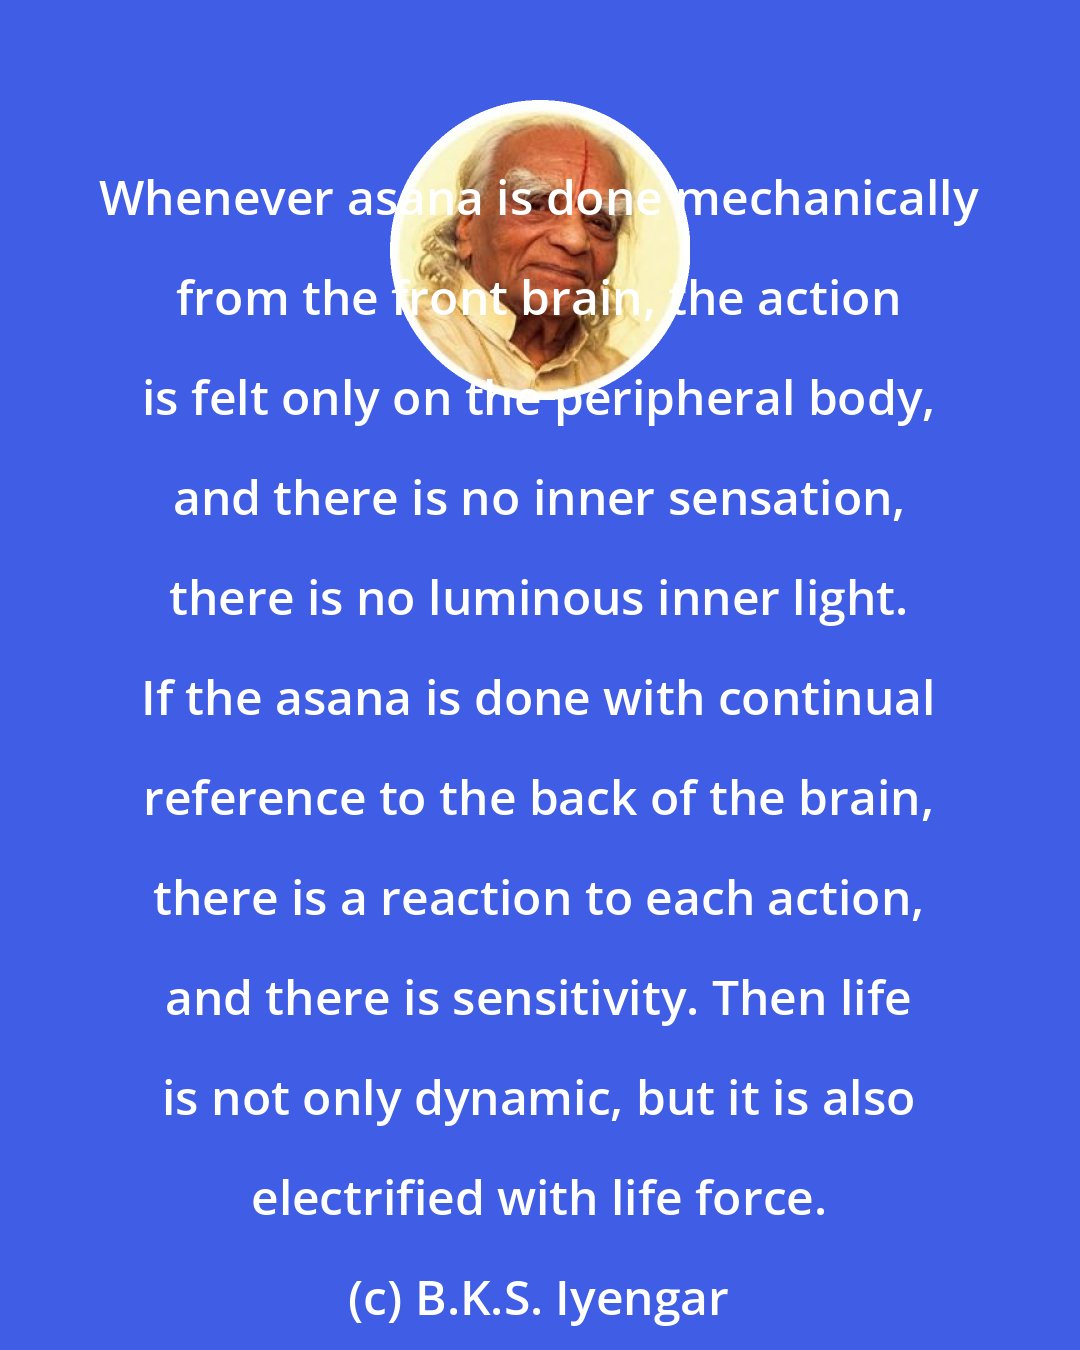 B.K.S. Iyengar: Whenever asana is done mechanically from the front brain, the action is felt only on the peripheral body, and there is no inner sensation, there is no luminous inner light. If the asana is done with continual reference to the back of the brain, there is a reaction to each action, and there is sensitivity. Then life is not only dynamic, but it is also electrified with life force.